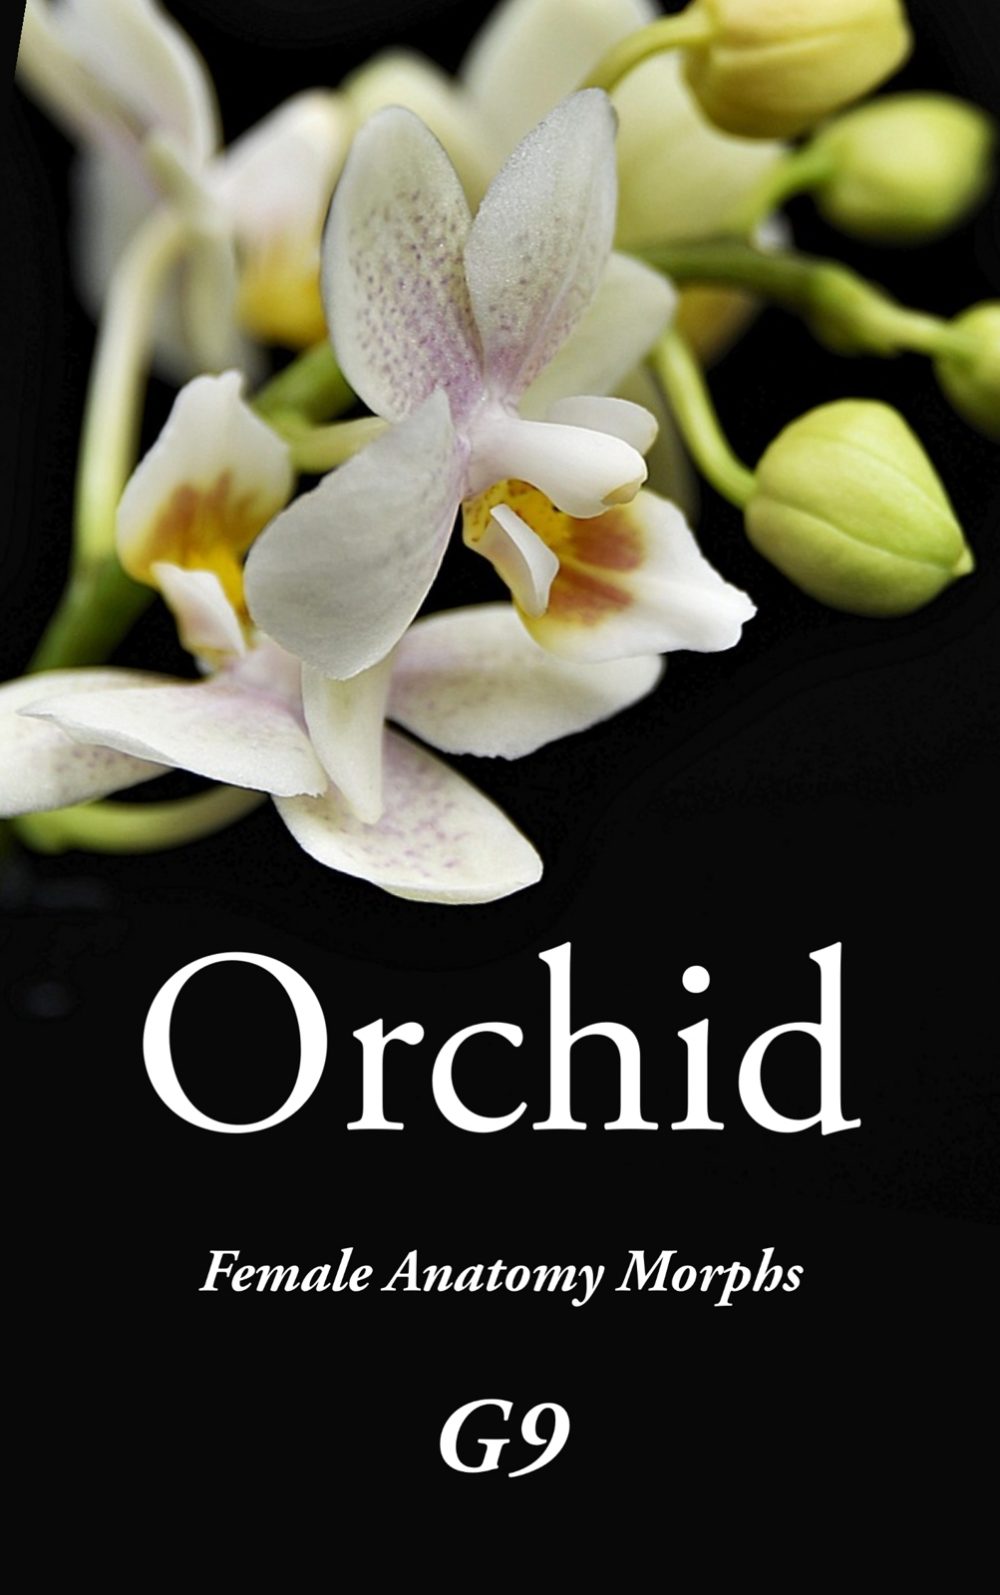 Orchid - Genital Morphs for G9F Anatomy